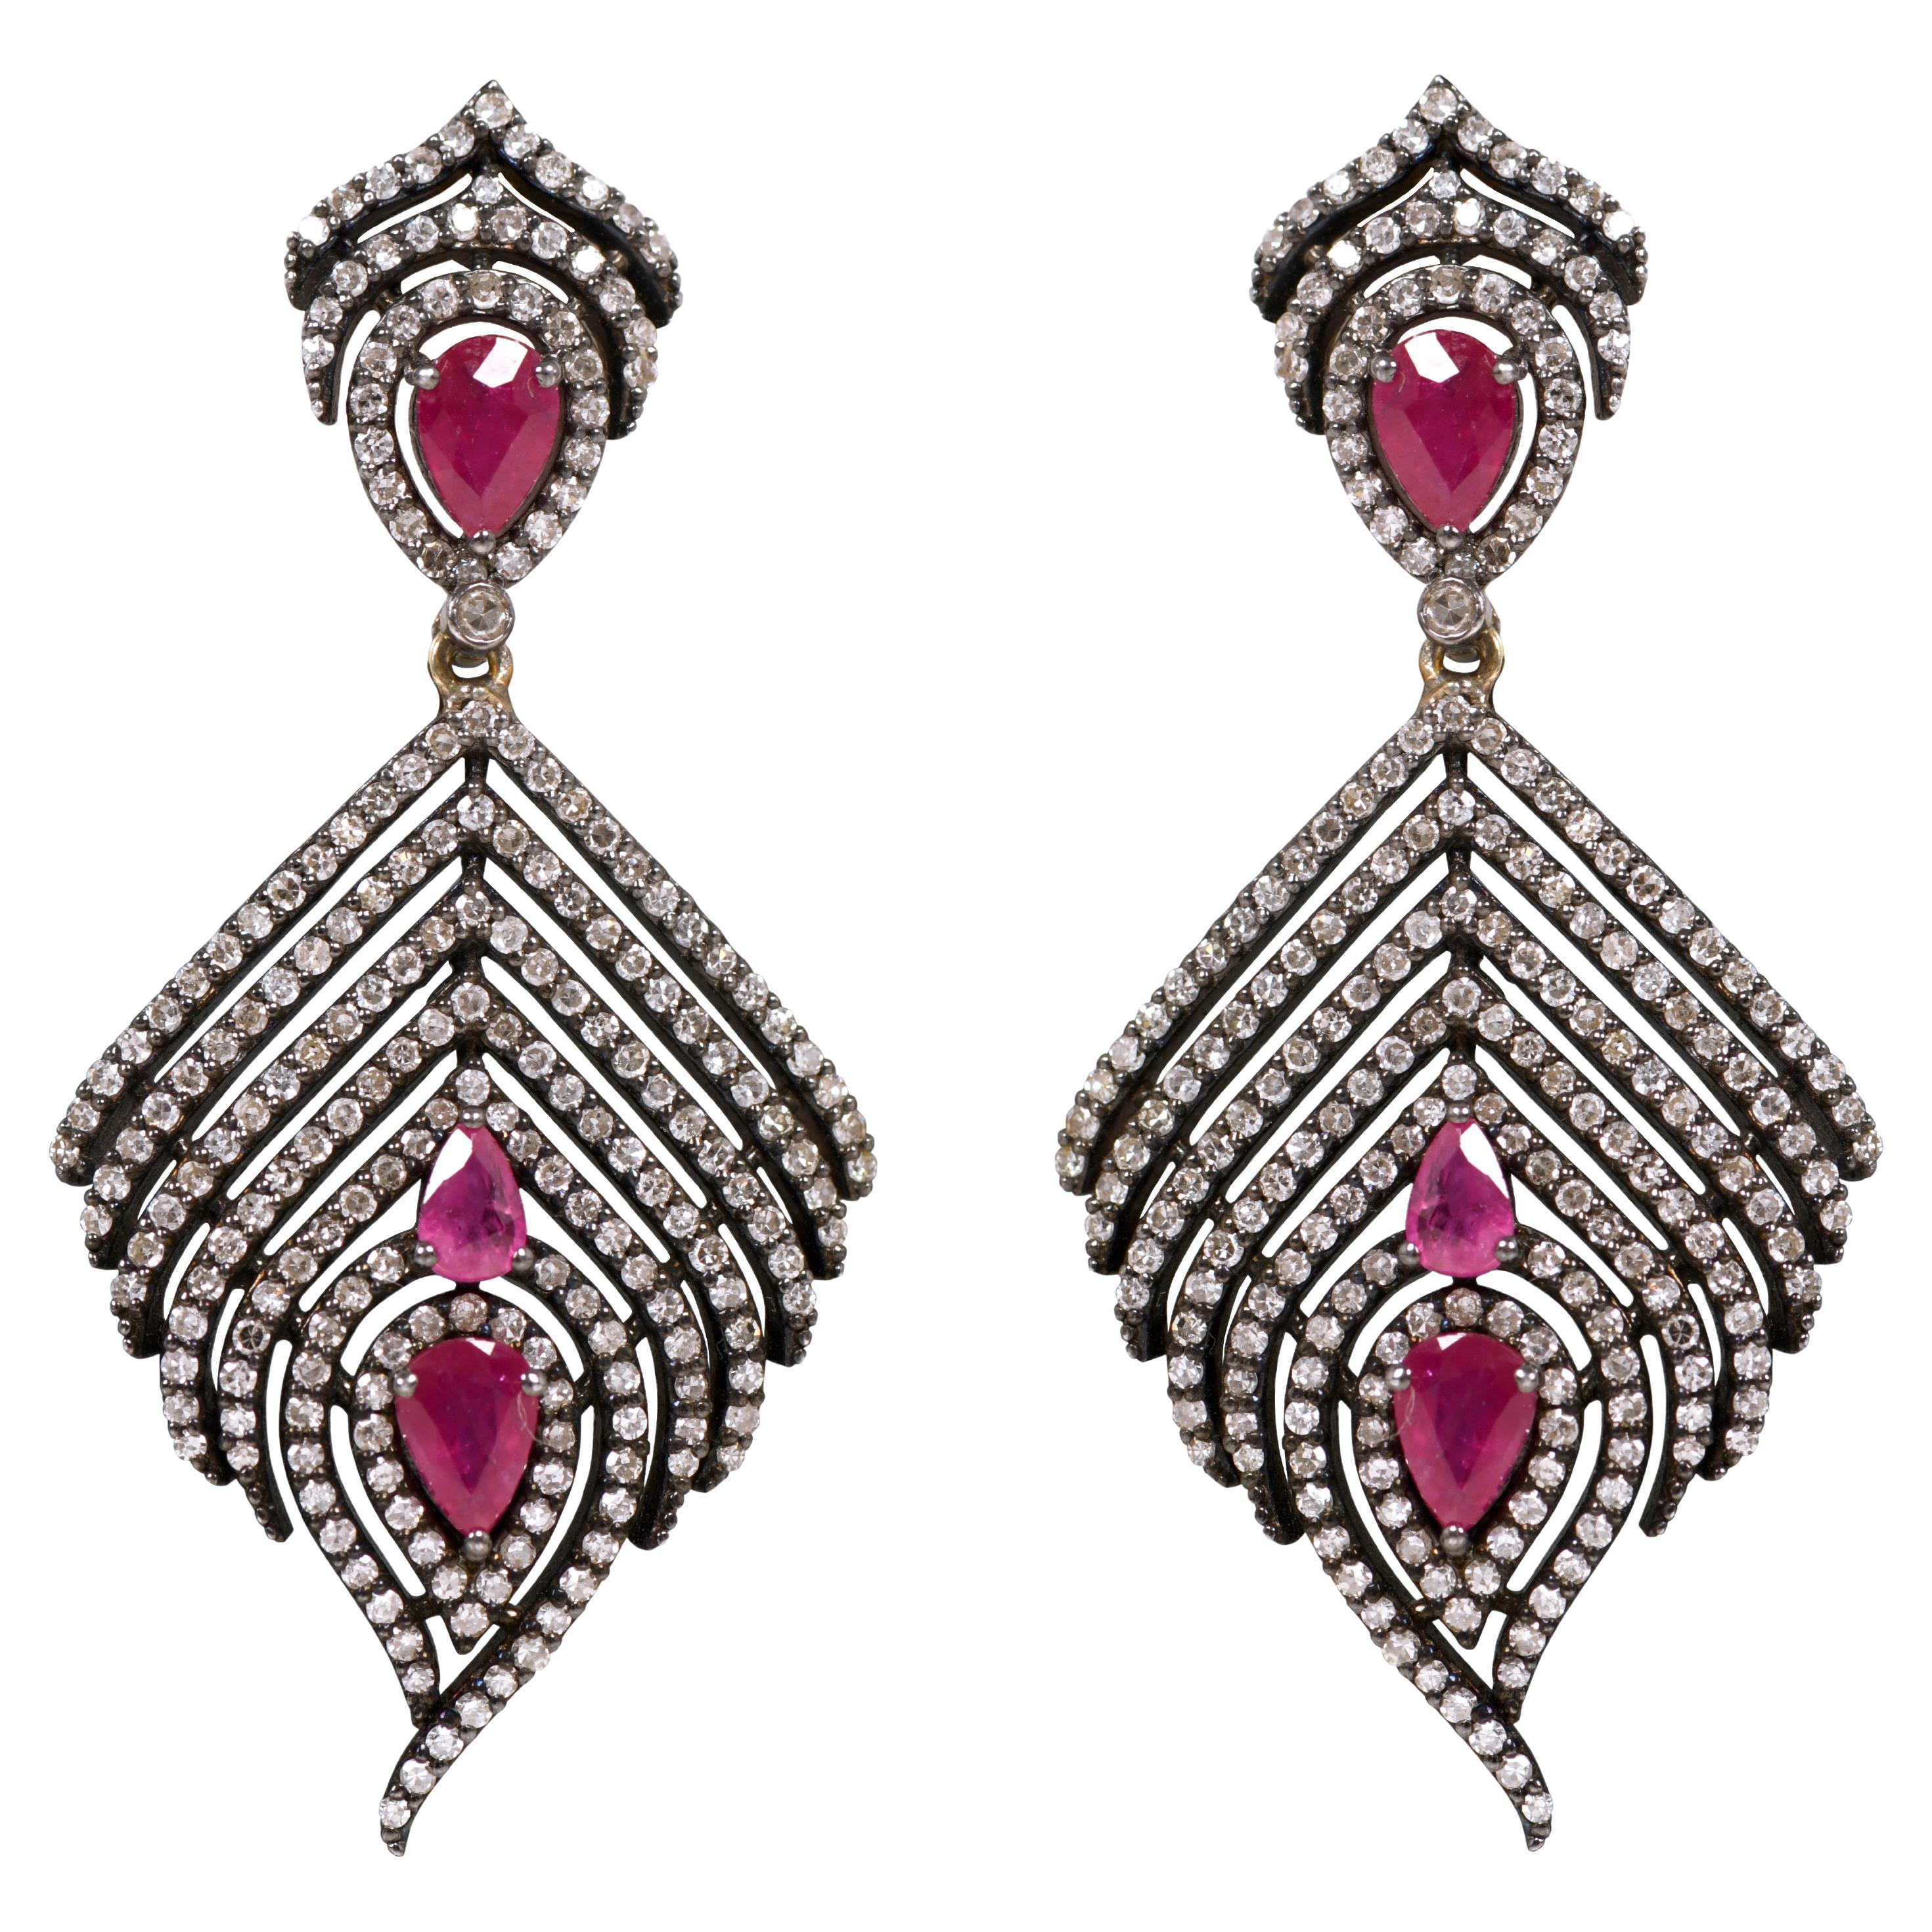 5.12 Carat Ruby and Diamond Drop Earrings in Victorian Style